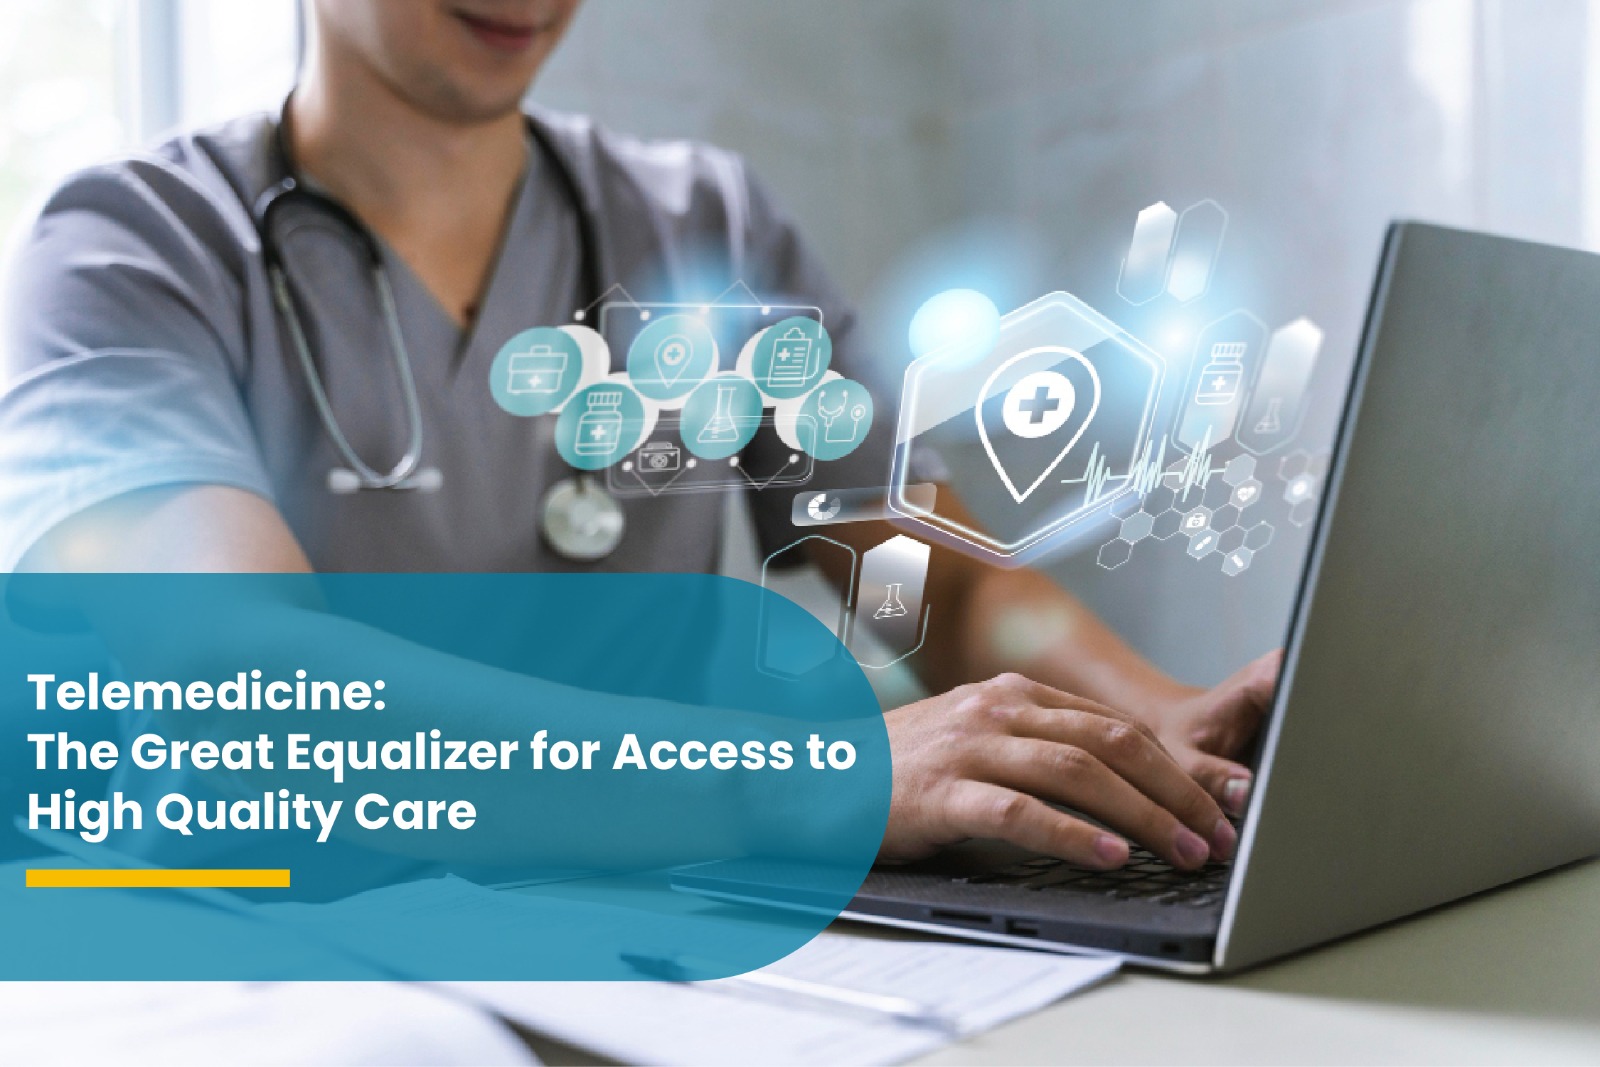 Telemedicine – the Great Equalizer for Access to High-quality Care